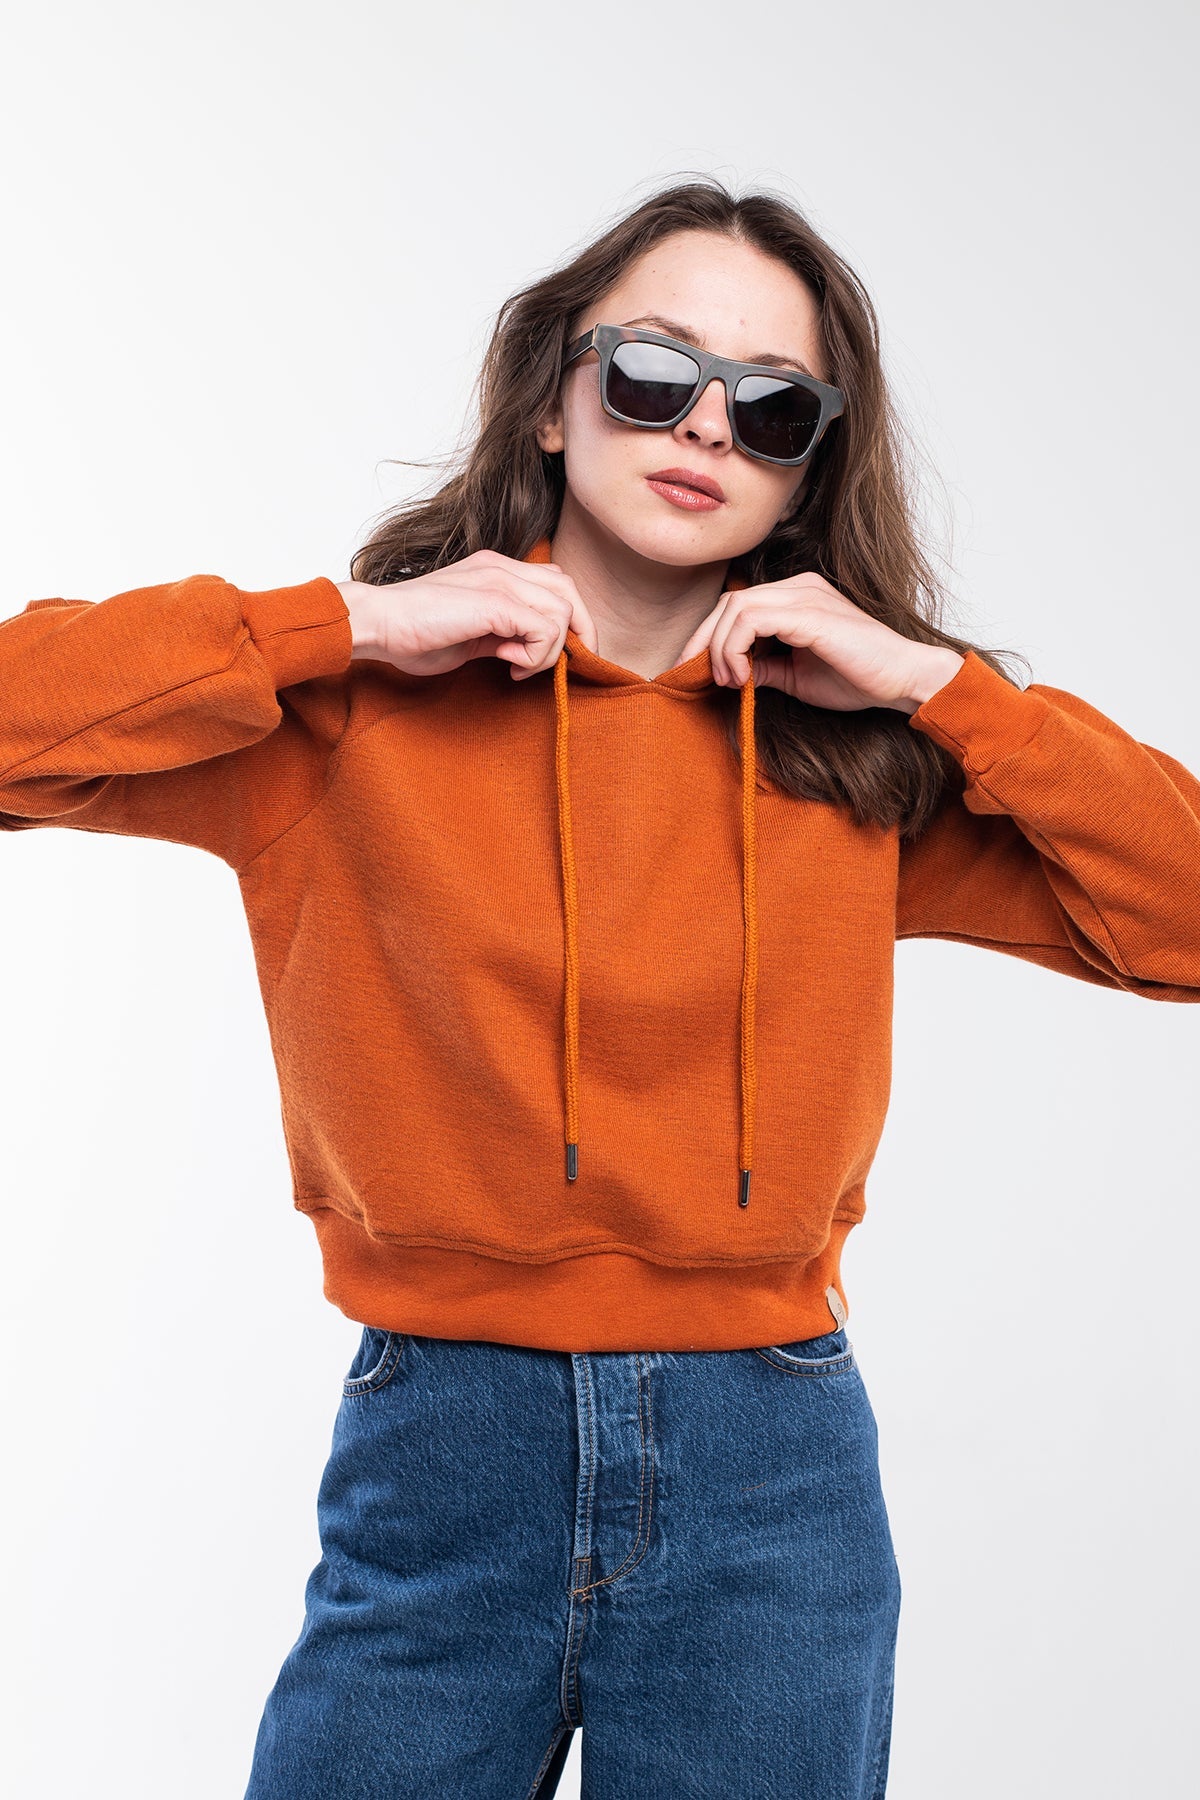 Cropped hoodie in tiger orange for women.